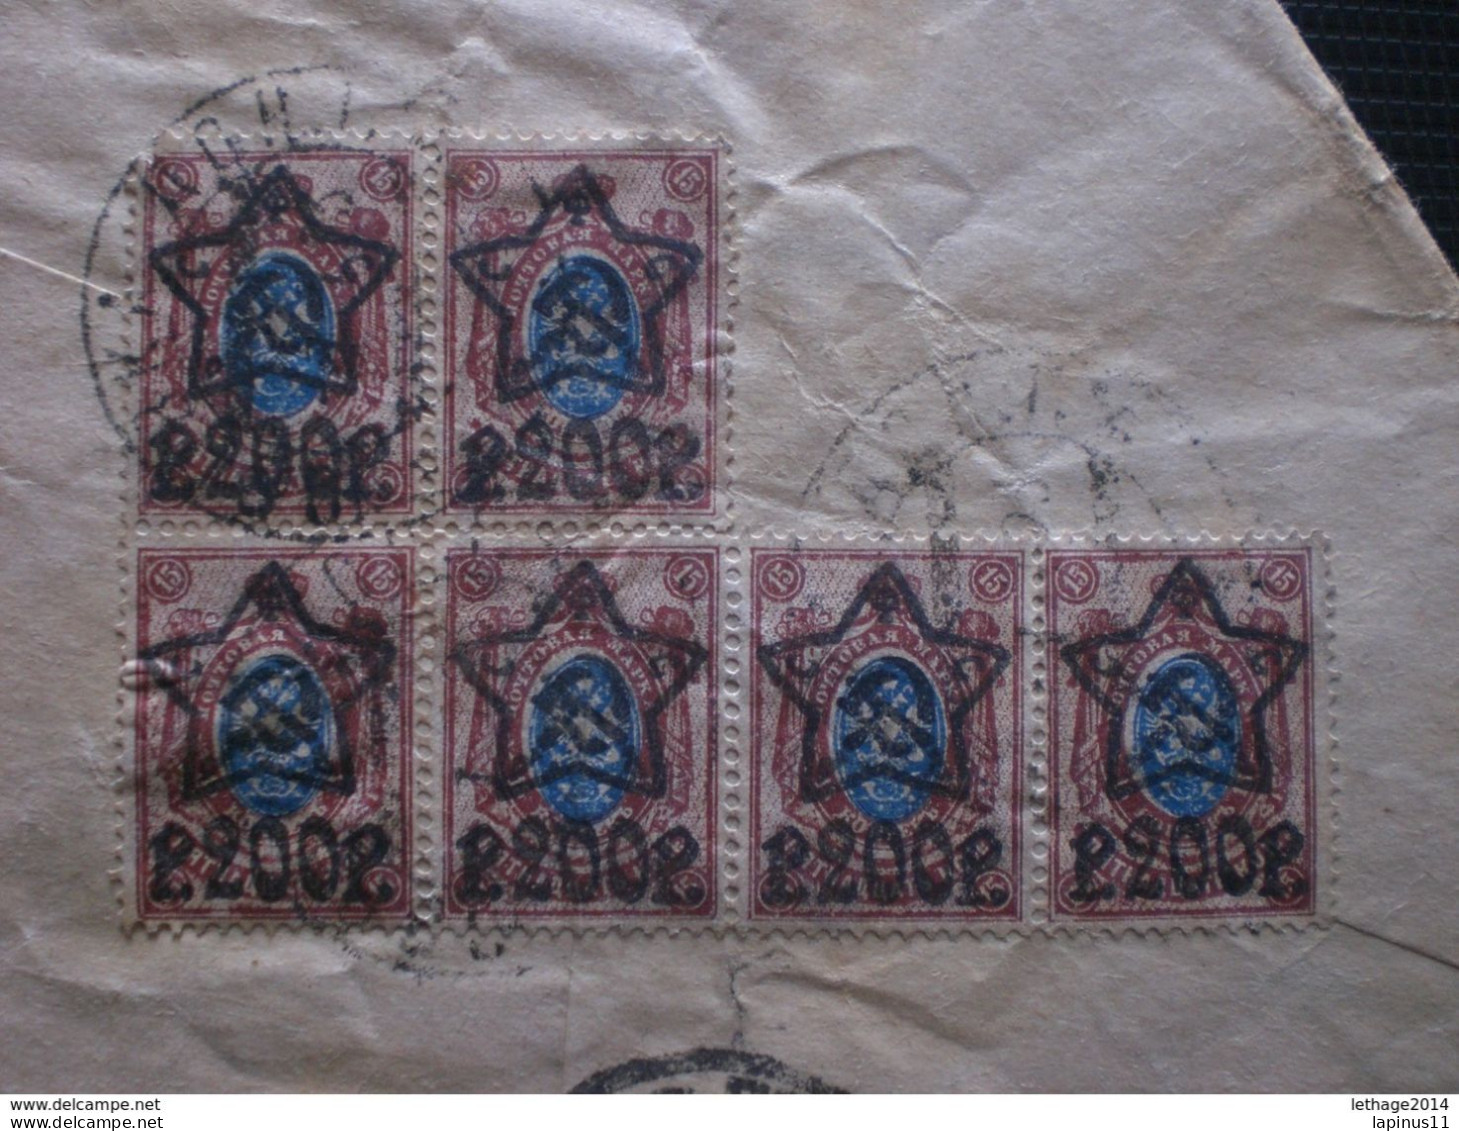 RUSSIA RUSSIE РОССИЯ STAMPS COVER 1923 RUSSIE TO ITALY FULL STAMPS RRR RIF.TAGG. (79) - Briefe U. Dokumente